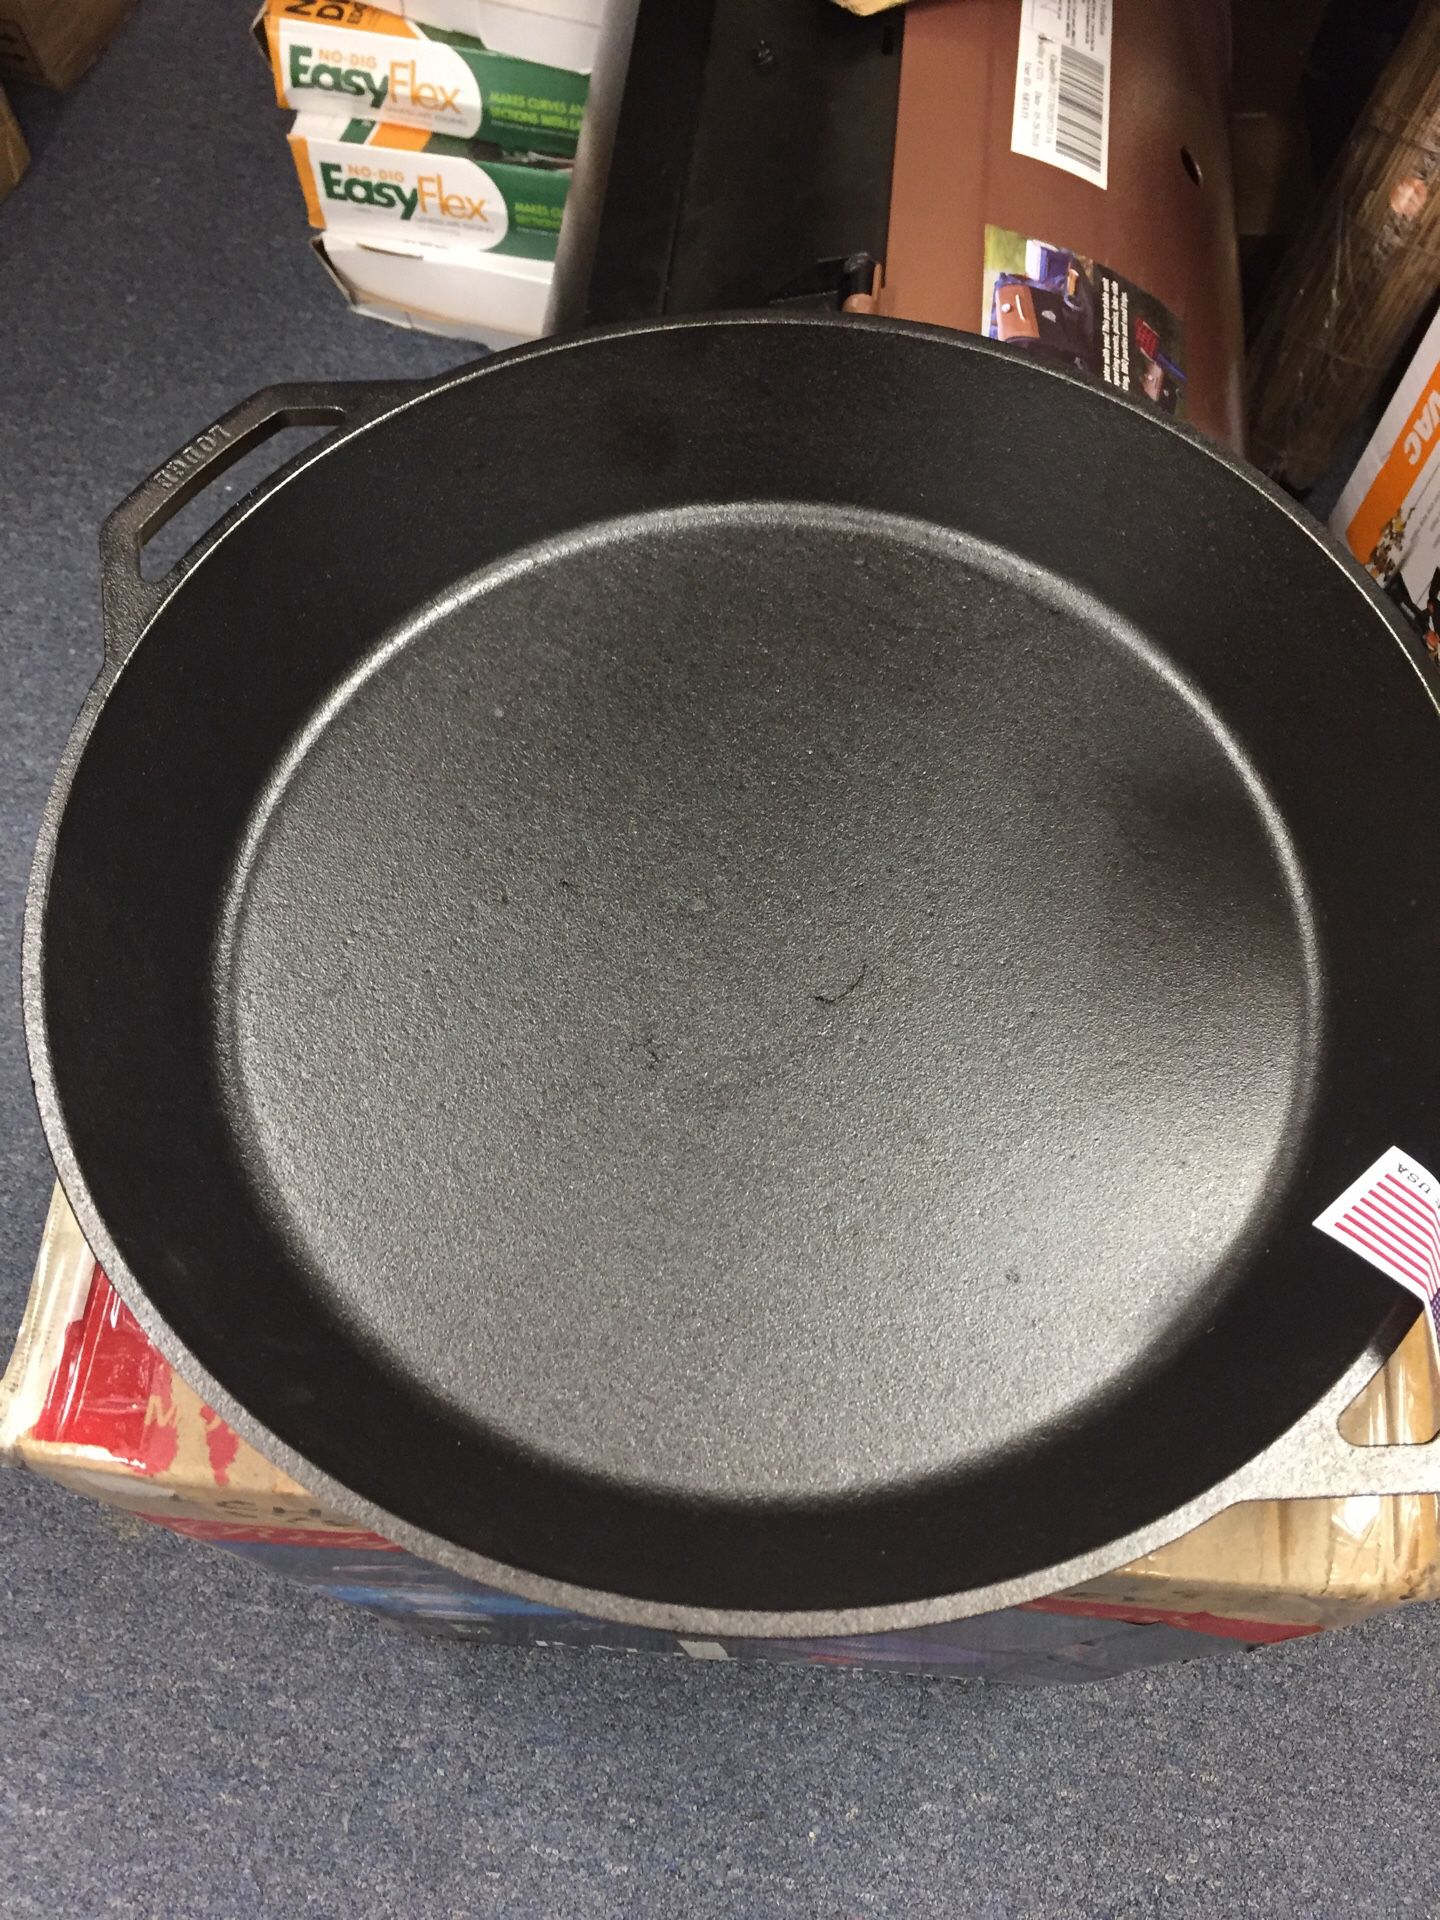 Lodge 17” cast iron season skillet for Sale in Simpsonville, SC - OfferUp